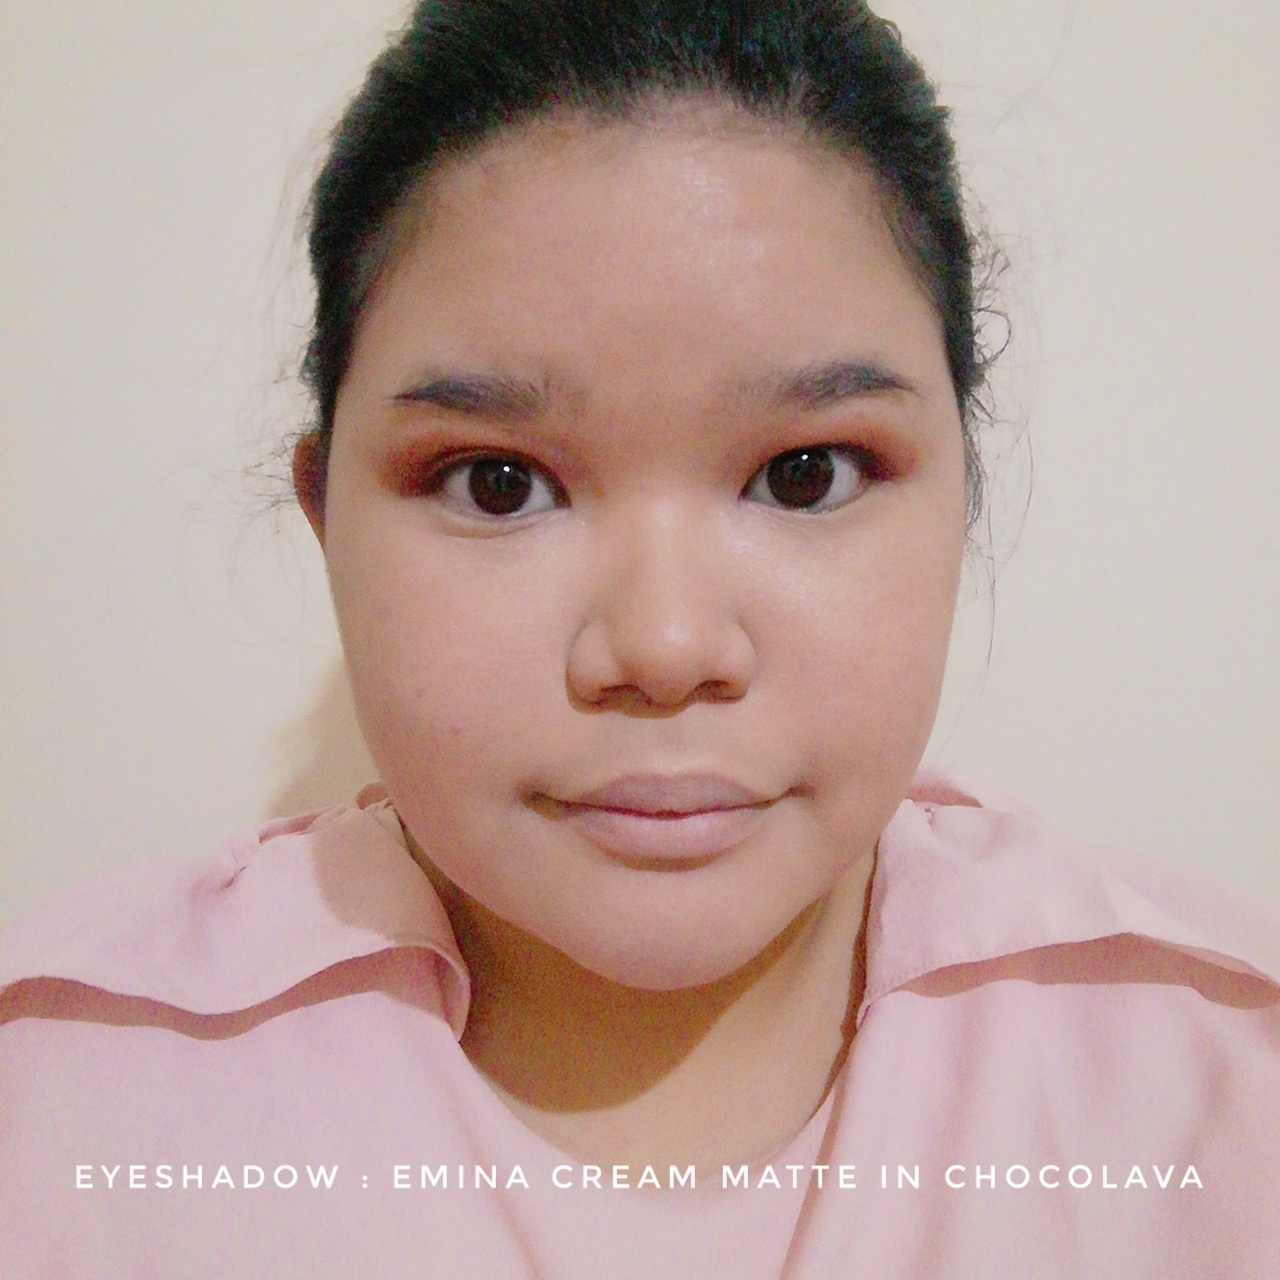 STROBING MAKE-UP USING DRUGSTORE PRODUCTS